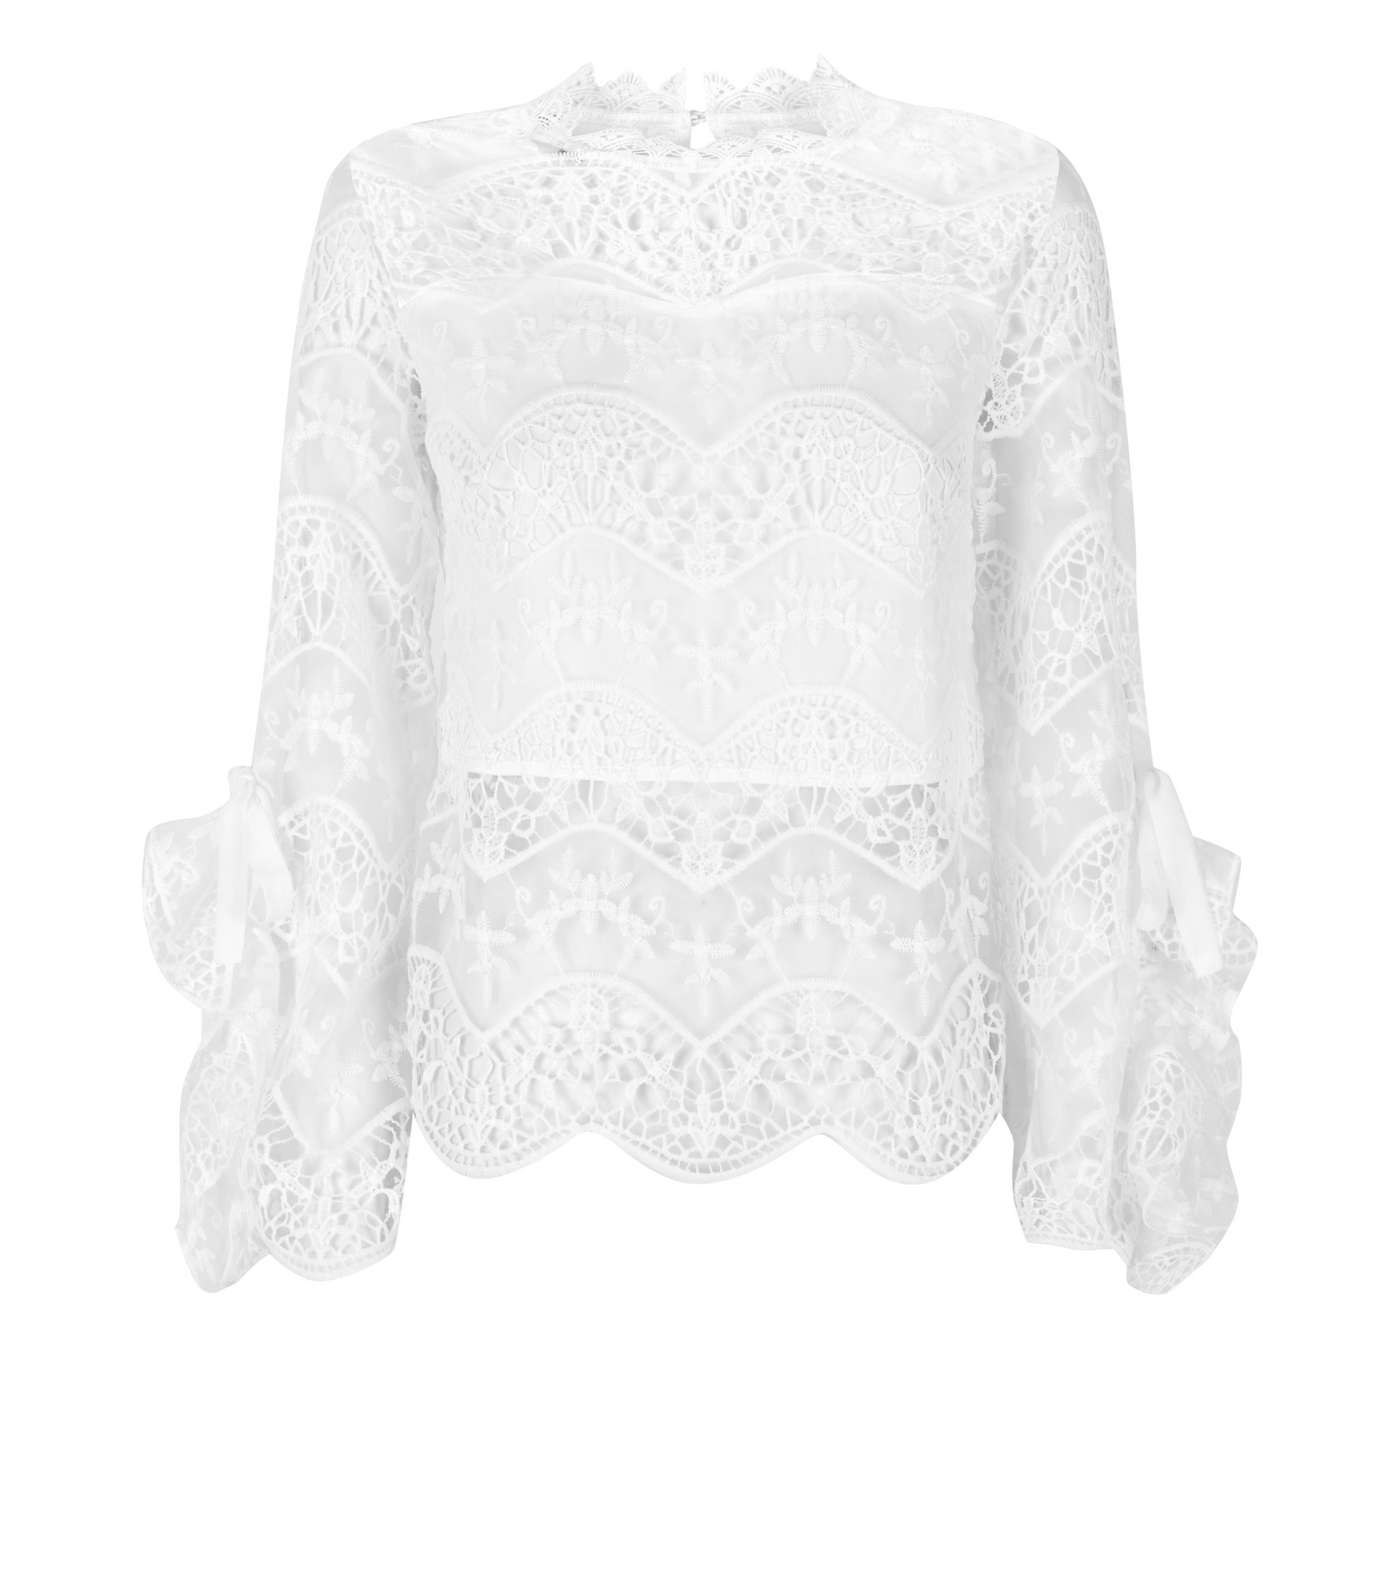 Parisian White Lace Frill Sleeve Top Image 4